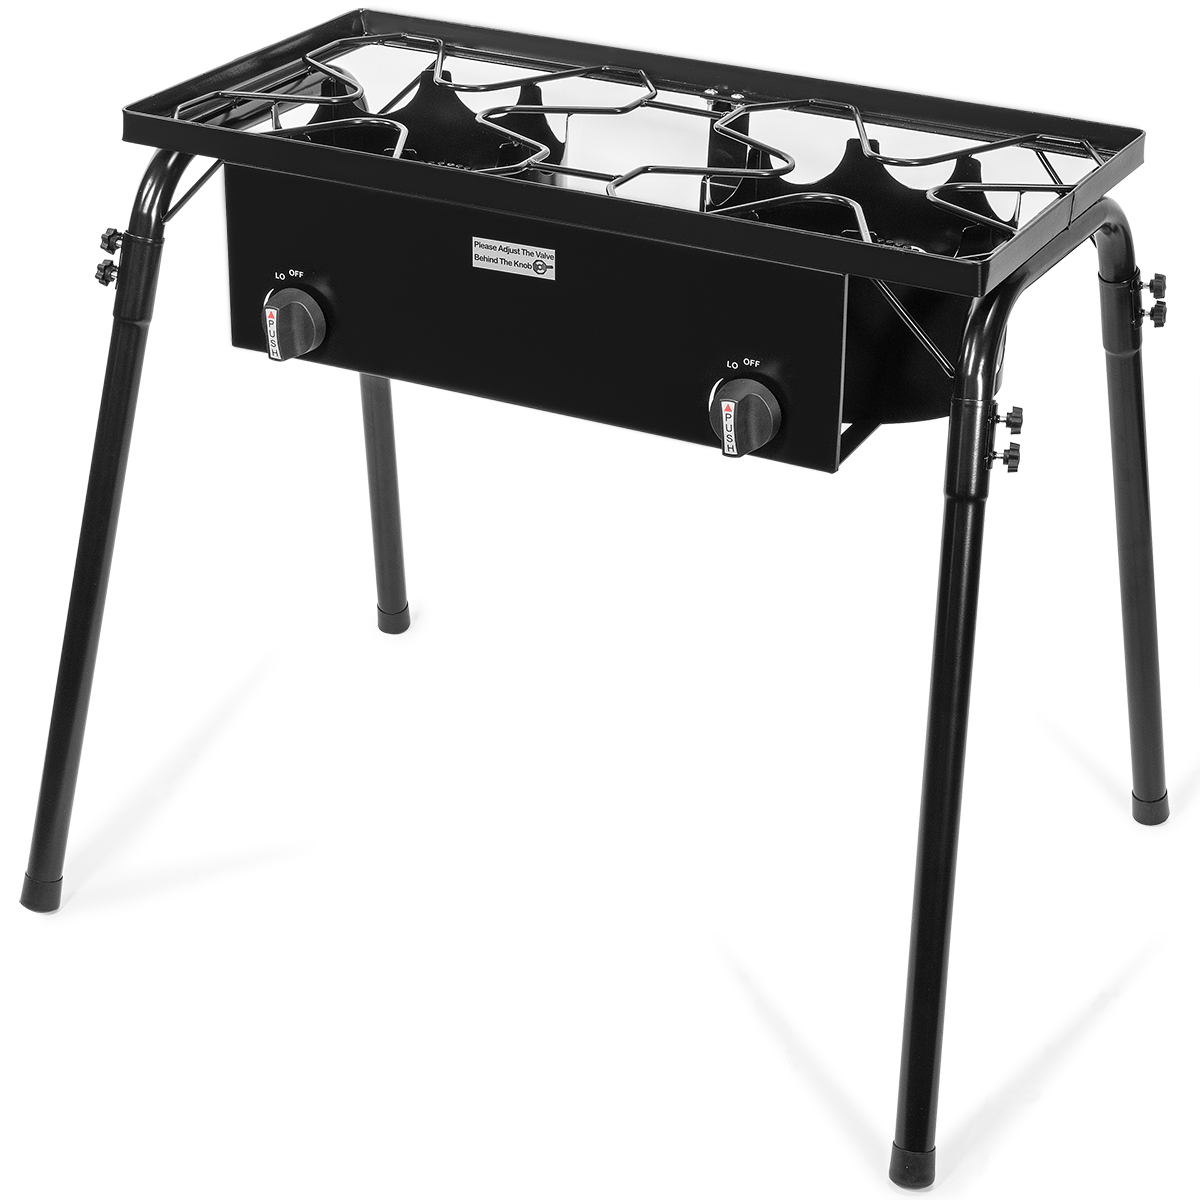 Barton Outdoor 70000 BTU 2-Burner Stove 95512-1 High-Pressure Grill Cooker BBQ Camp Gas Stove Stand - image 2 of 7